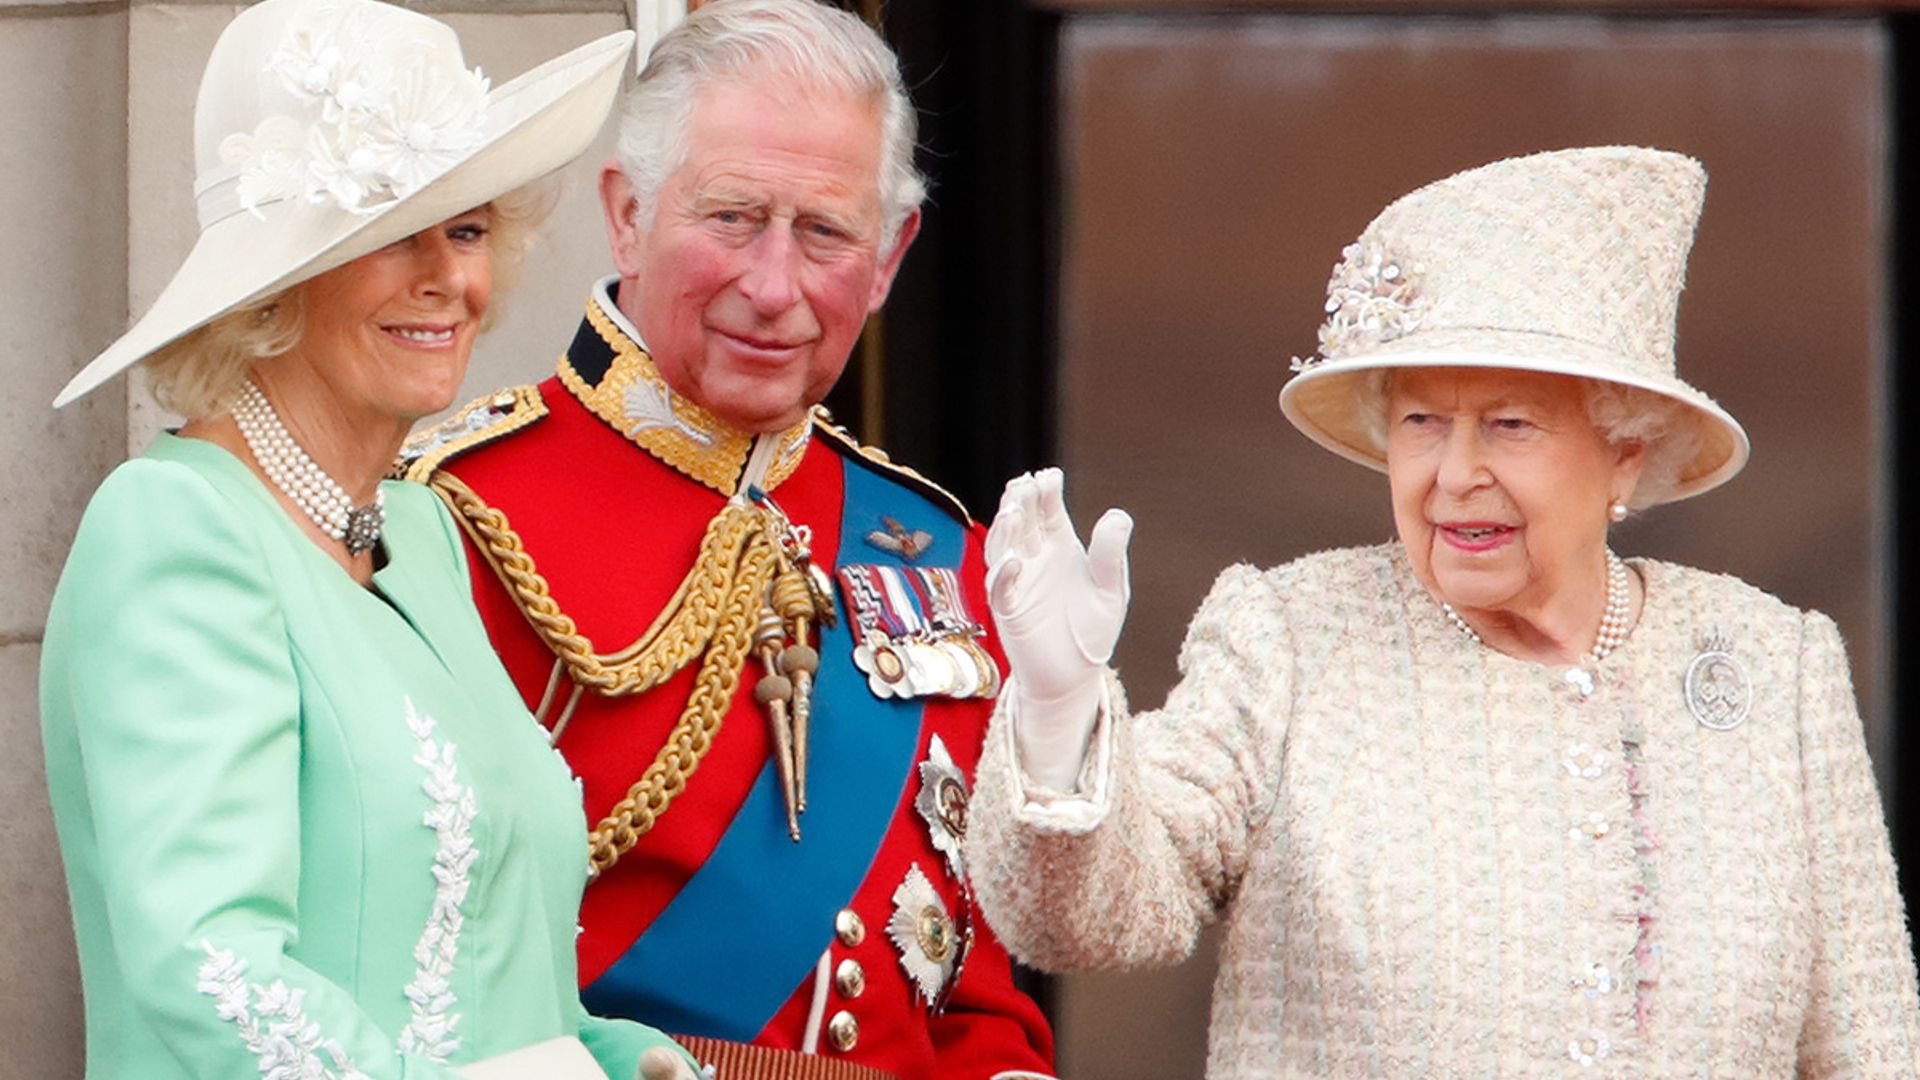 Will Prince Charles ever live at Buckingham Palace?